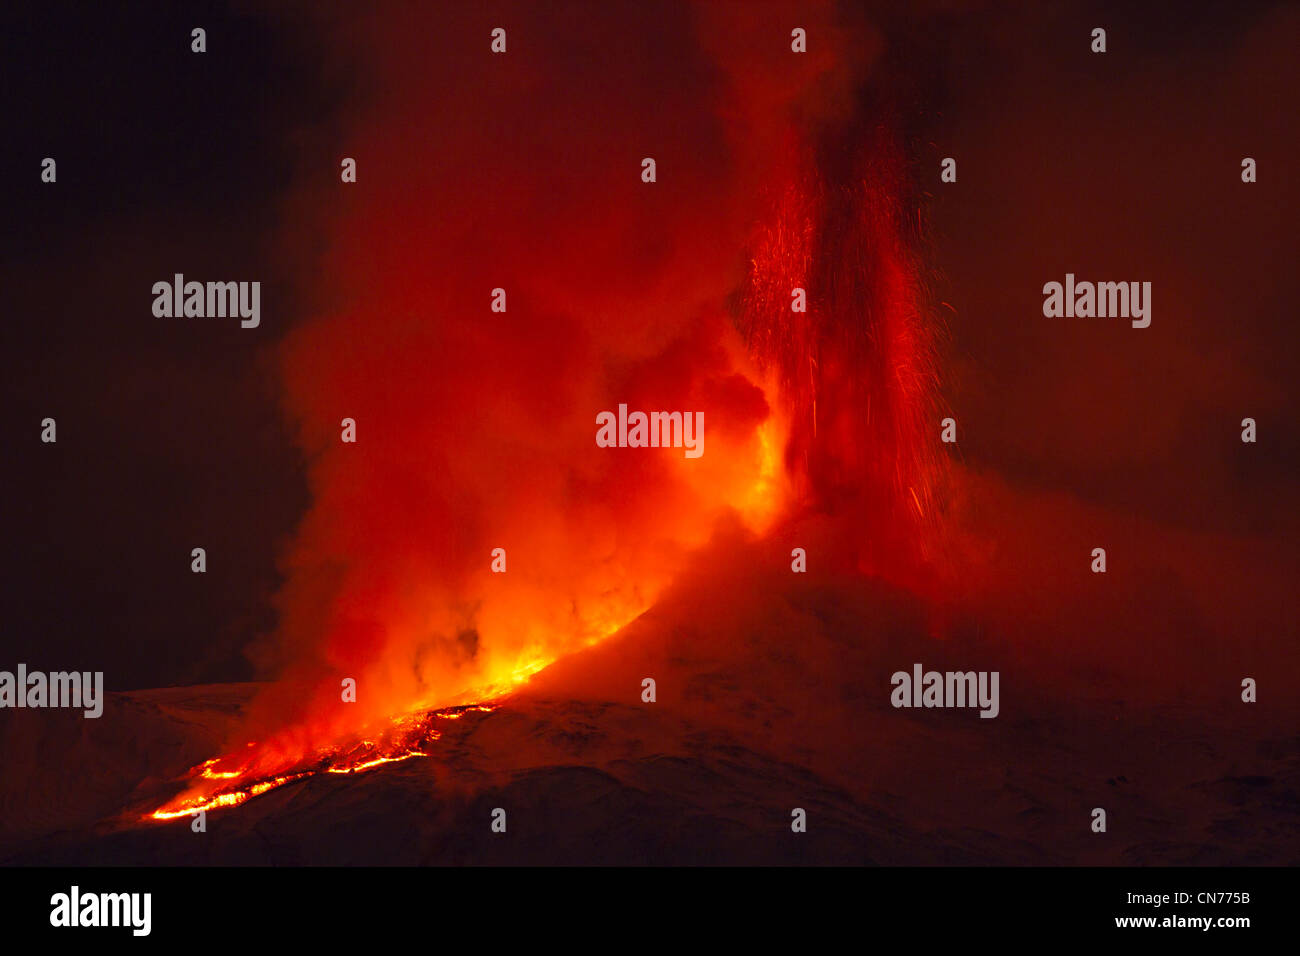 Eruption of Mount Etna, 8-9 February 2012, viewed from Milo, Sicily, Italy Stock Photo